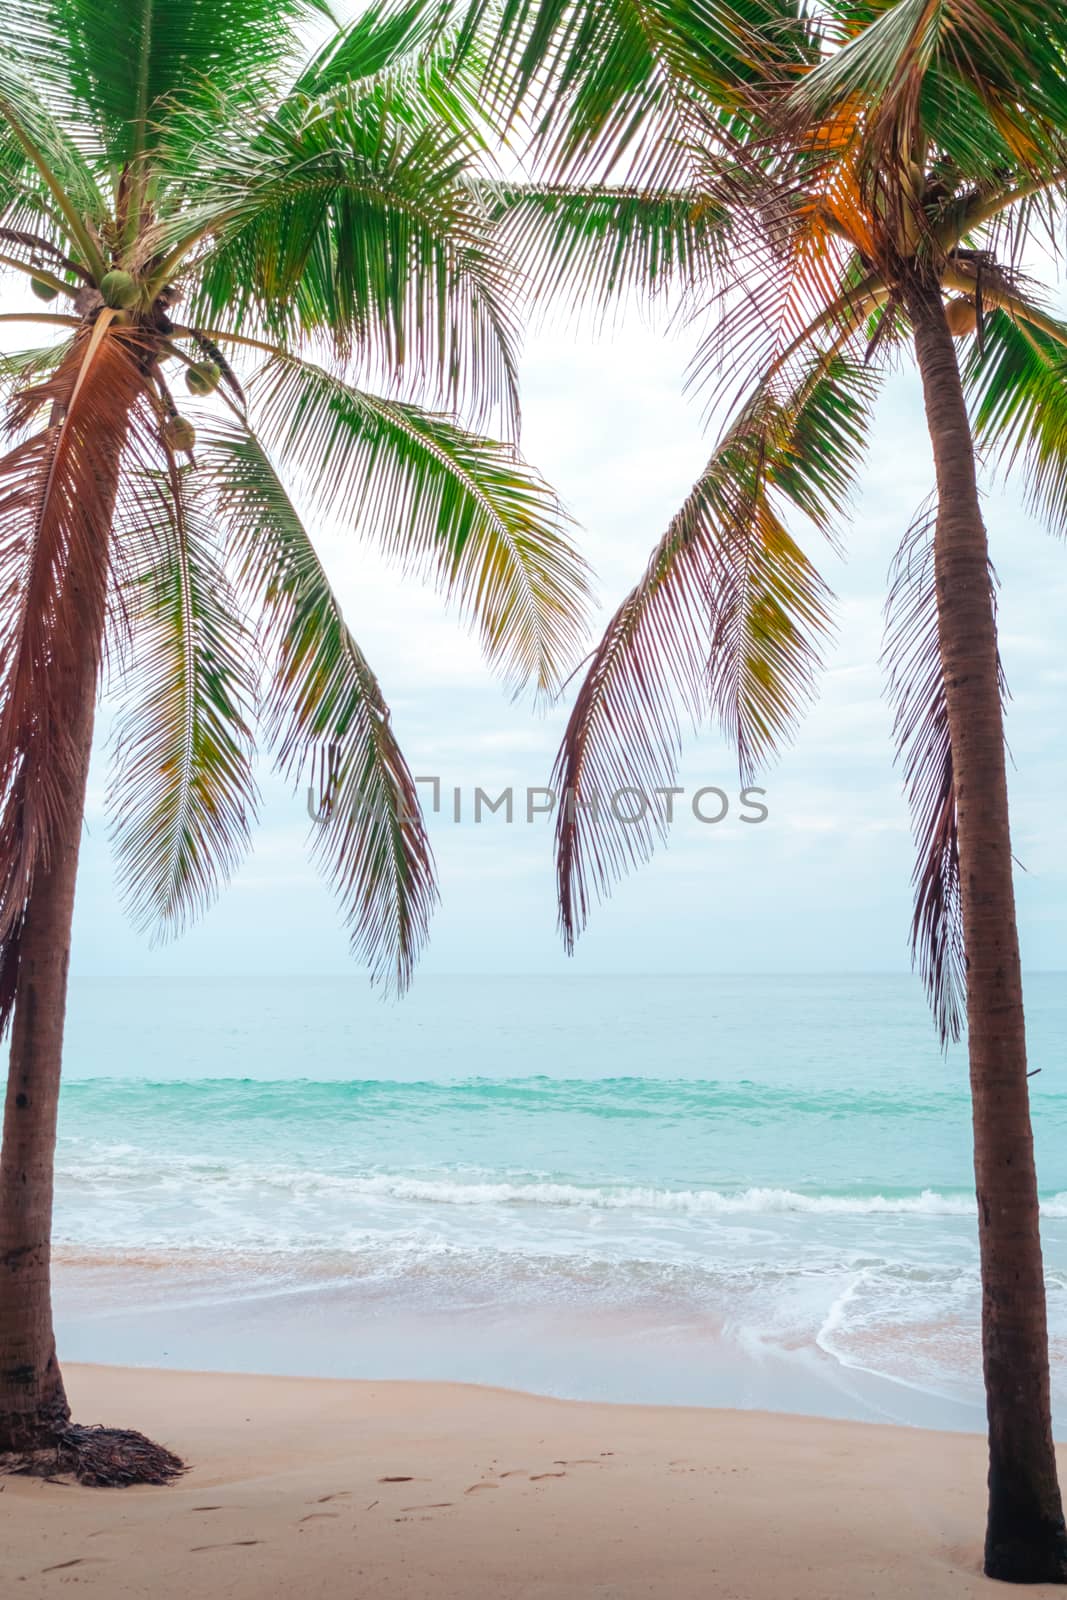 Tropical nature clean beach and white sand in summer with sun light blue sky and bokeh background. by Suwant